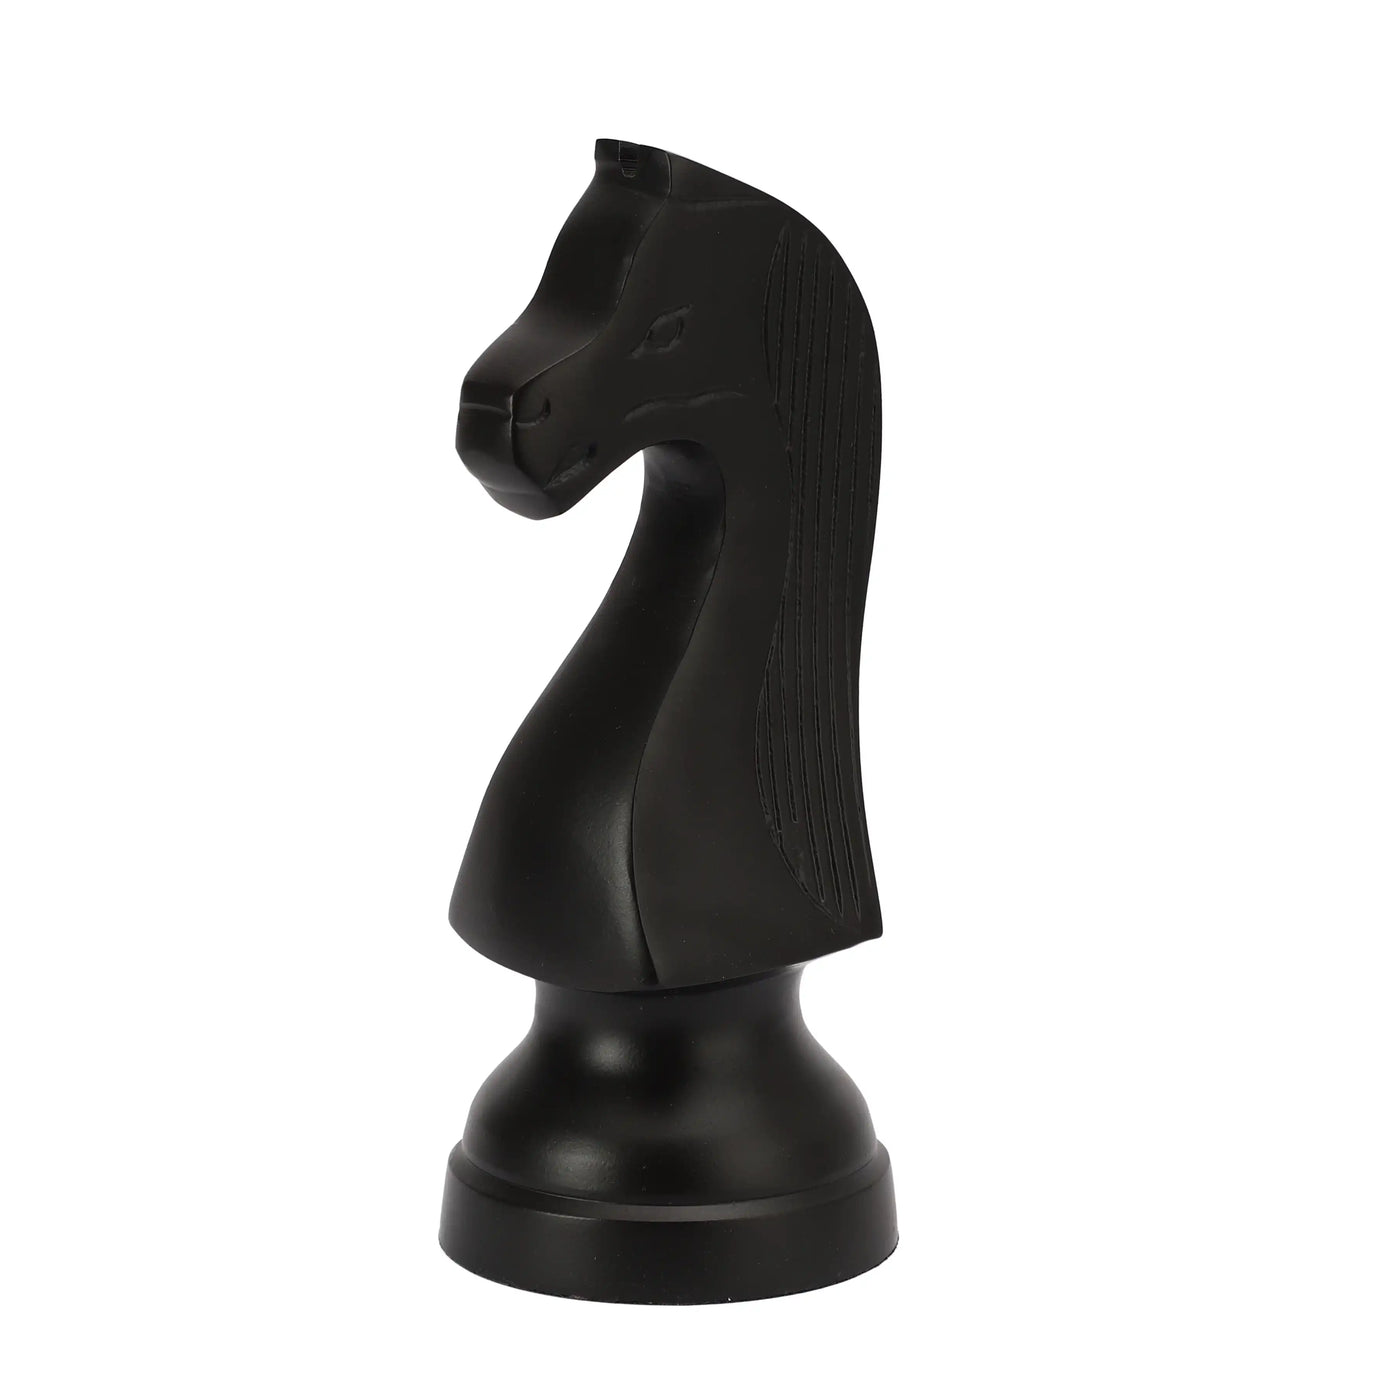 Chess Horse Black Over-Size- 70-330-24-3